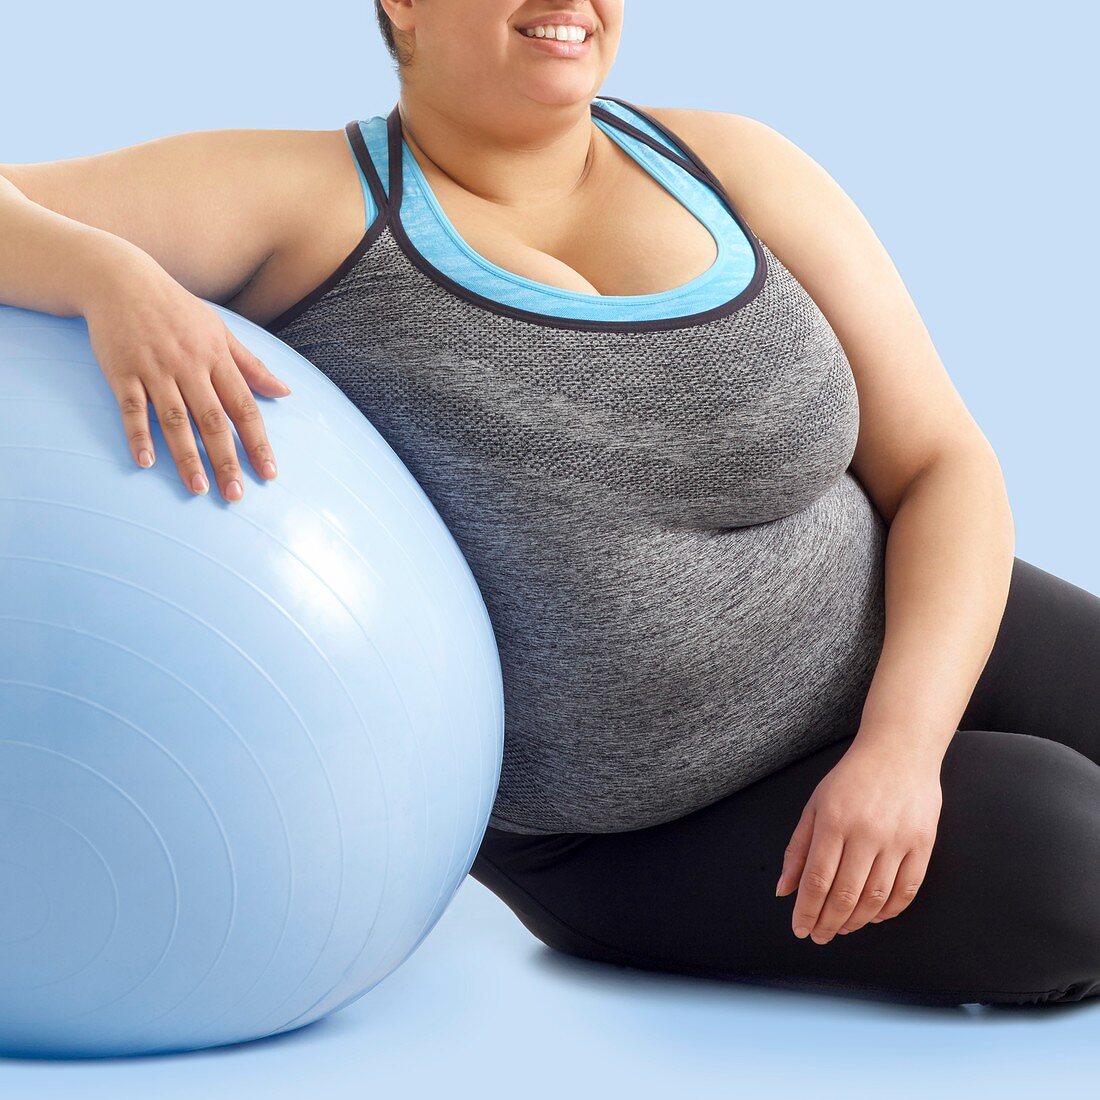 Overweight woman resting on exercise ball